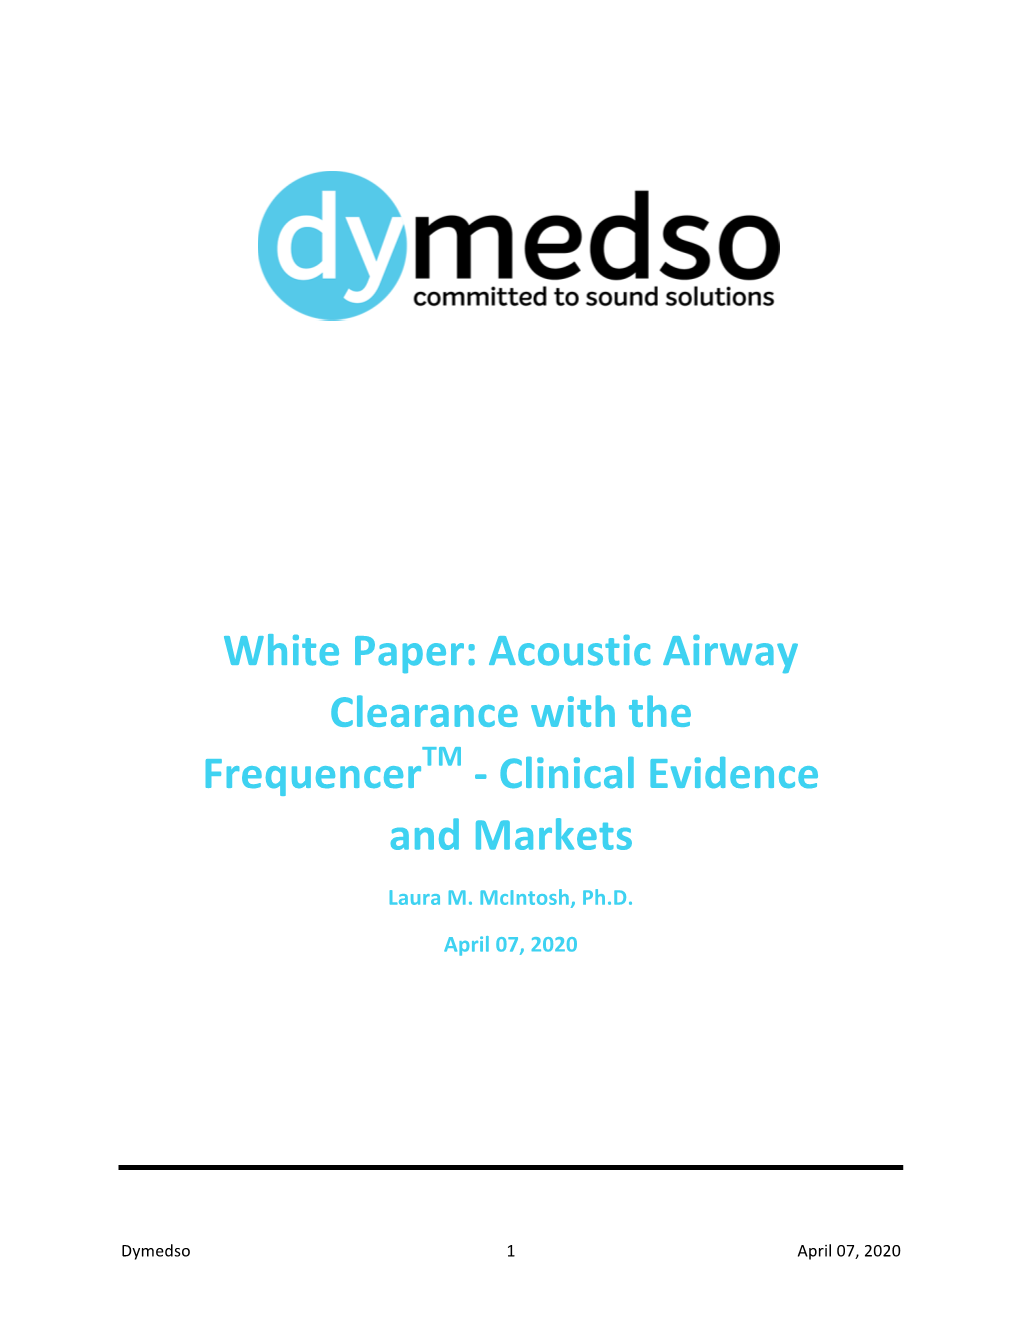 White Paper: Acoustic Airway Clearance with the Frequencertm - Clinical Evidence and Markets